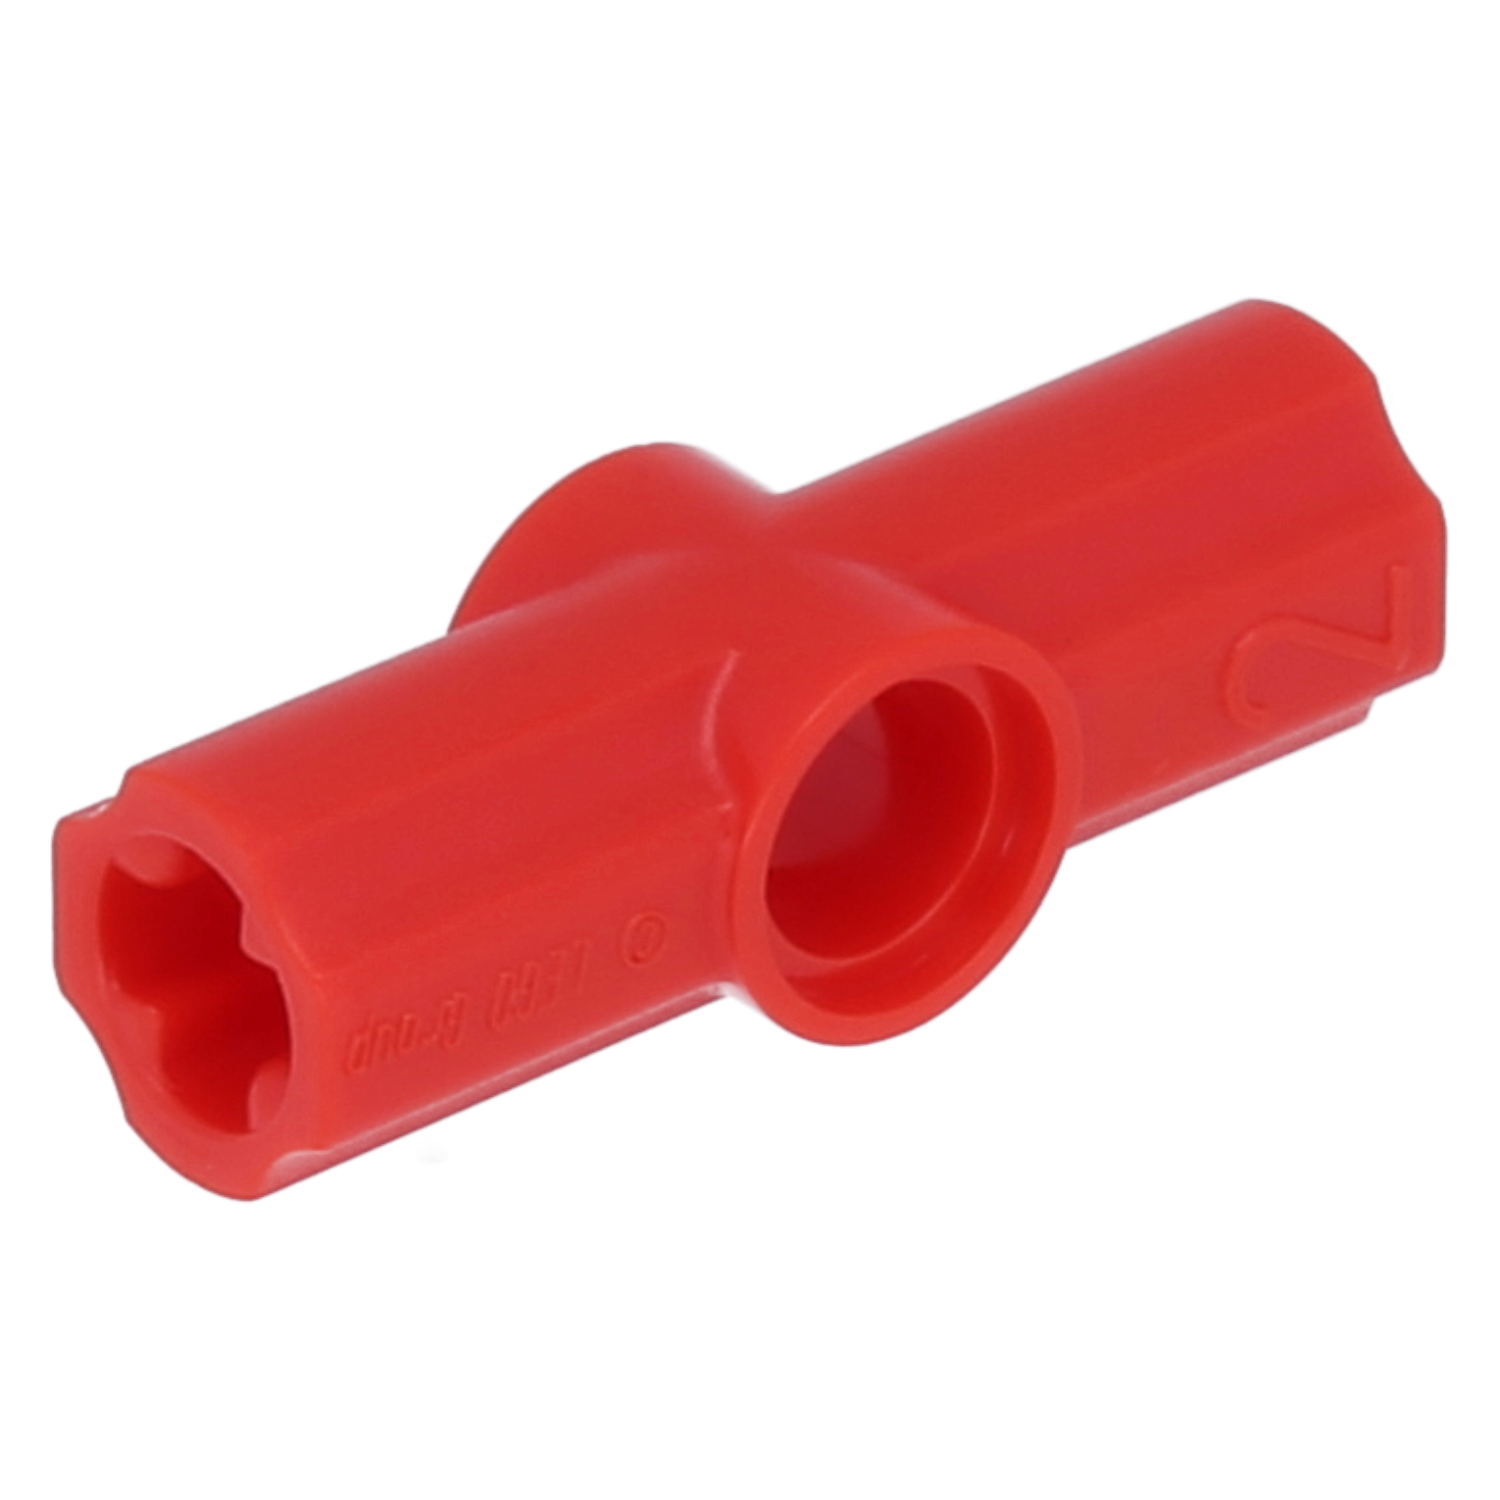 LEGO Technic axis - axis and pen connector (angled)